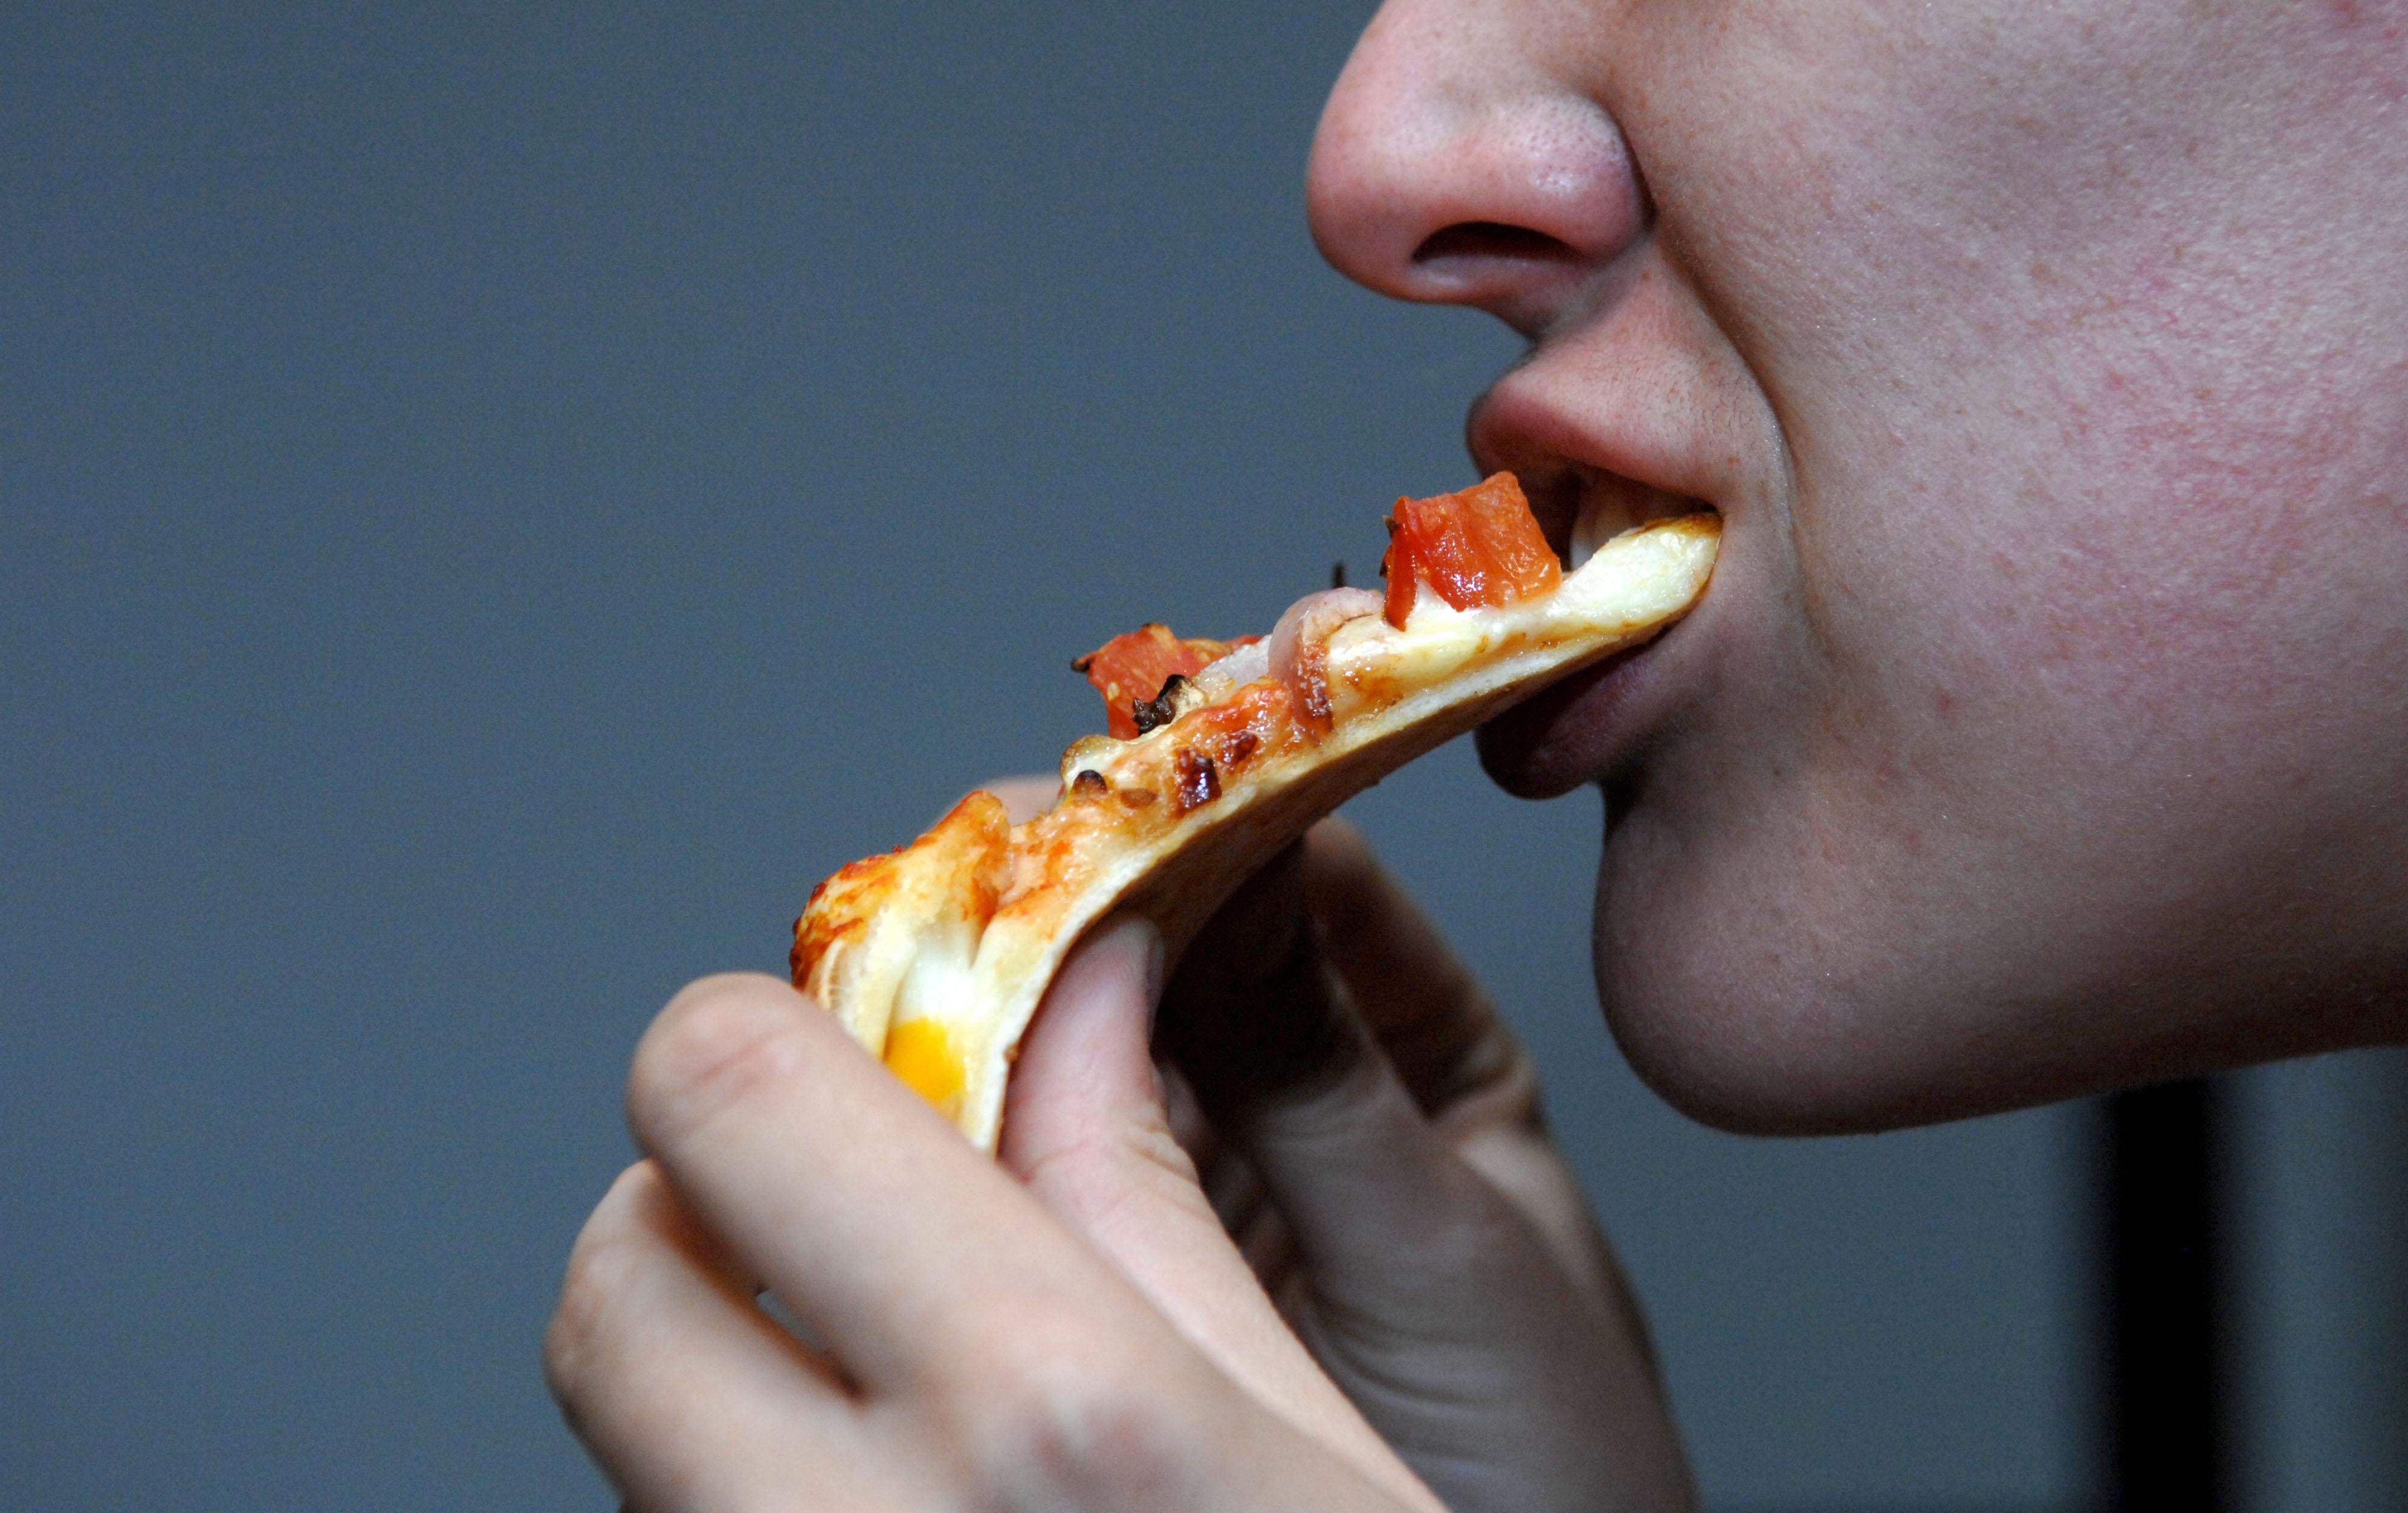 Humans are smarter eaters than previously thought, study suggests (Steve Parsons/PA)